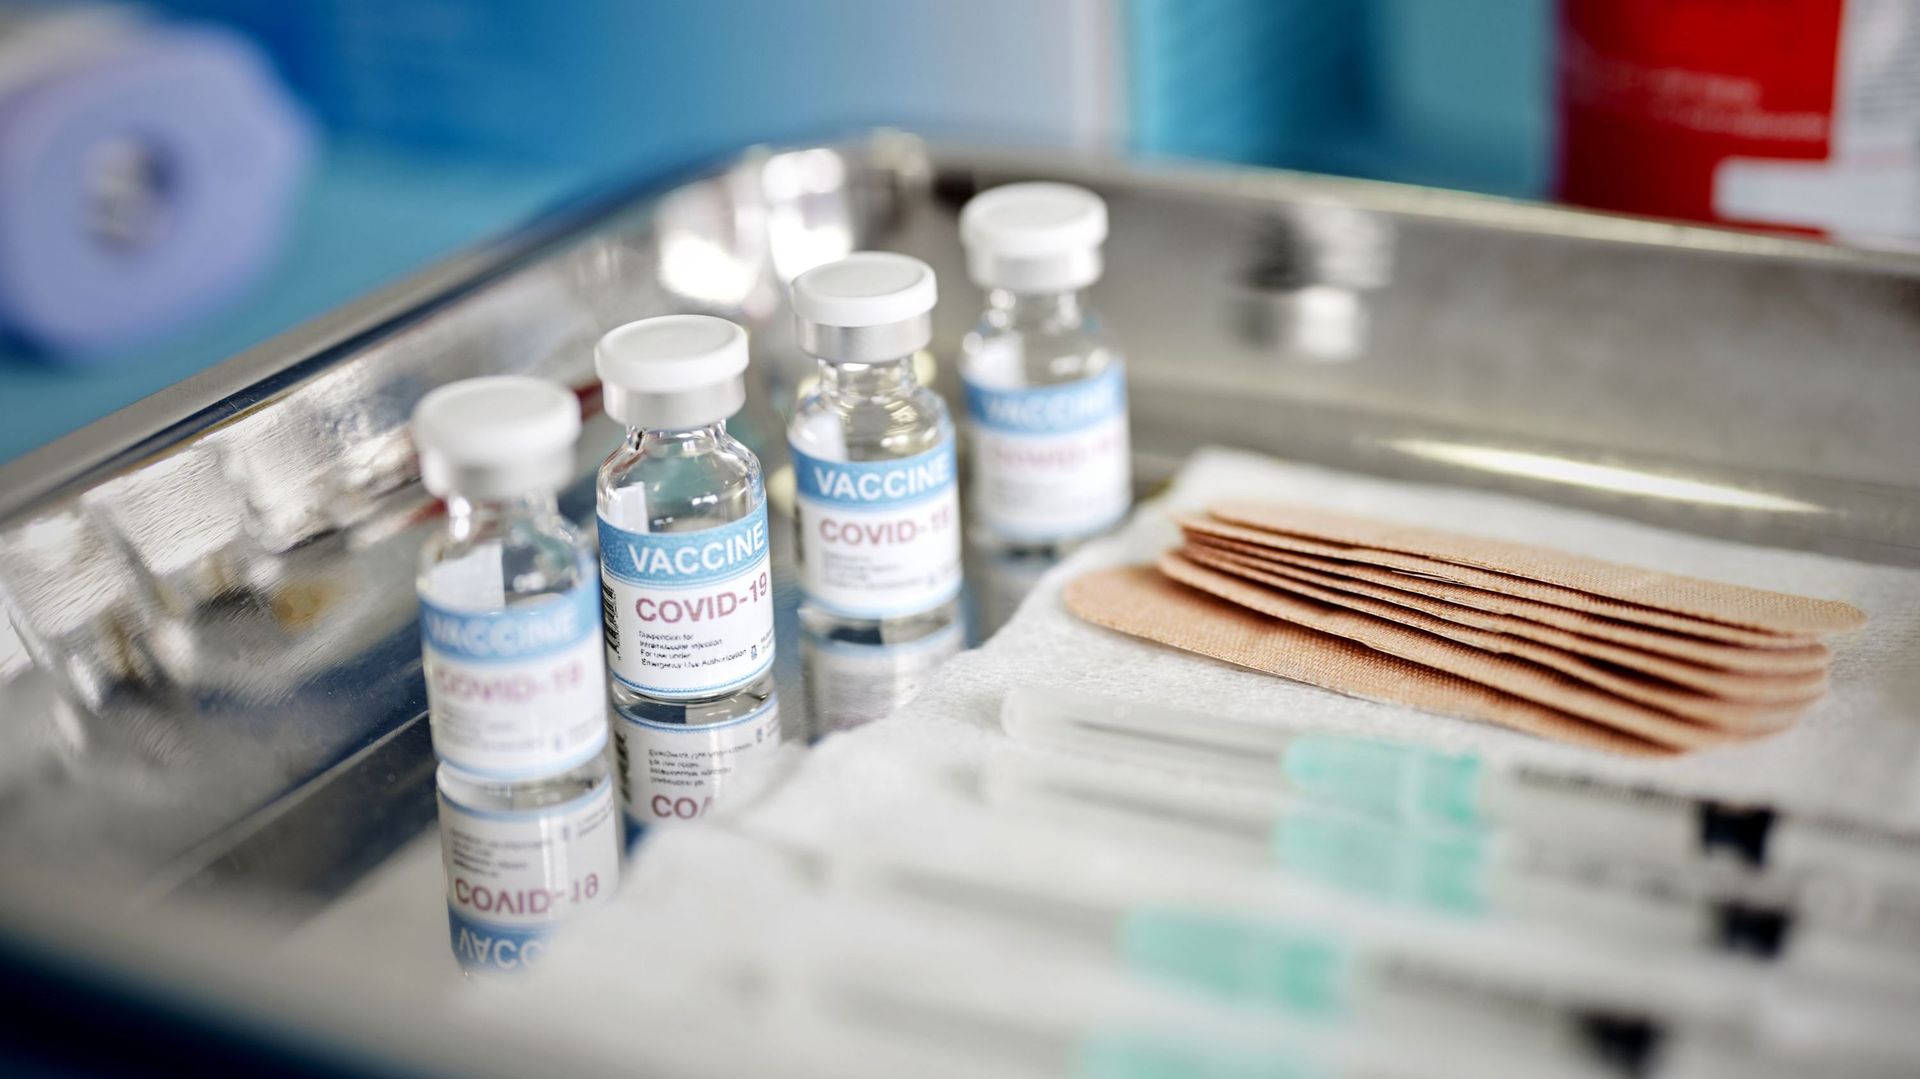 Vials With the Covid-19 Vaccine and Syringes are Displayed On a Tray at the Corona Vaccination Center